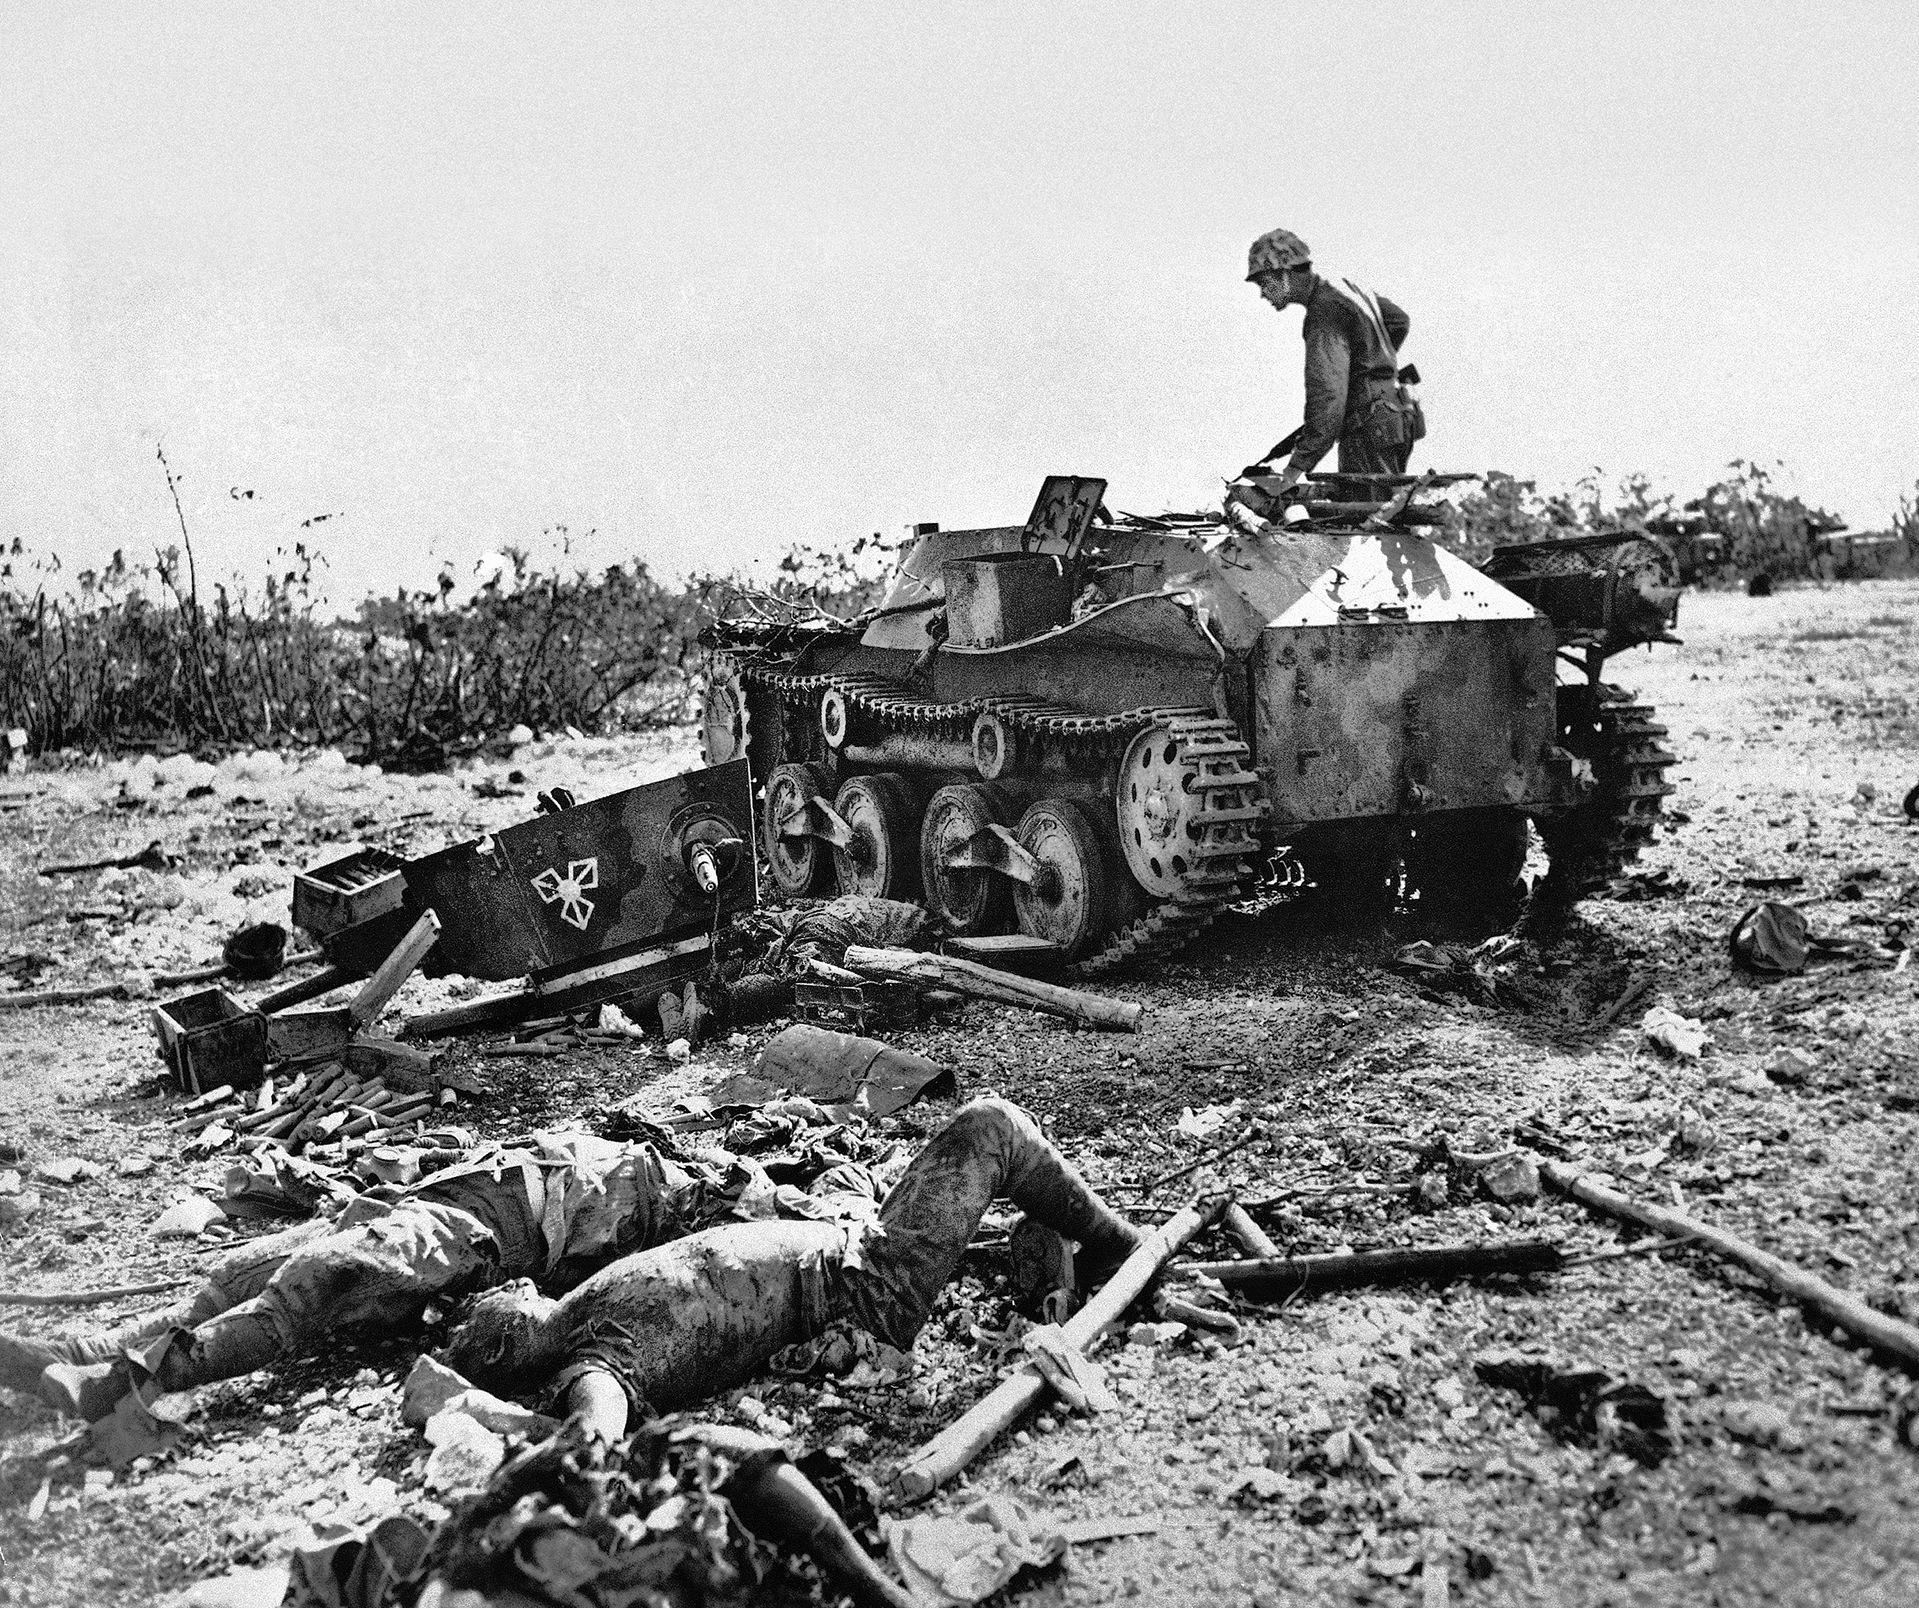 Marine Corporal Edward E. Brooks of Washington, standing atop a Japanese tank he put out of action, looks at the bodies of Japanese tankmen scattered around near the captured Japanese airfield.